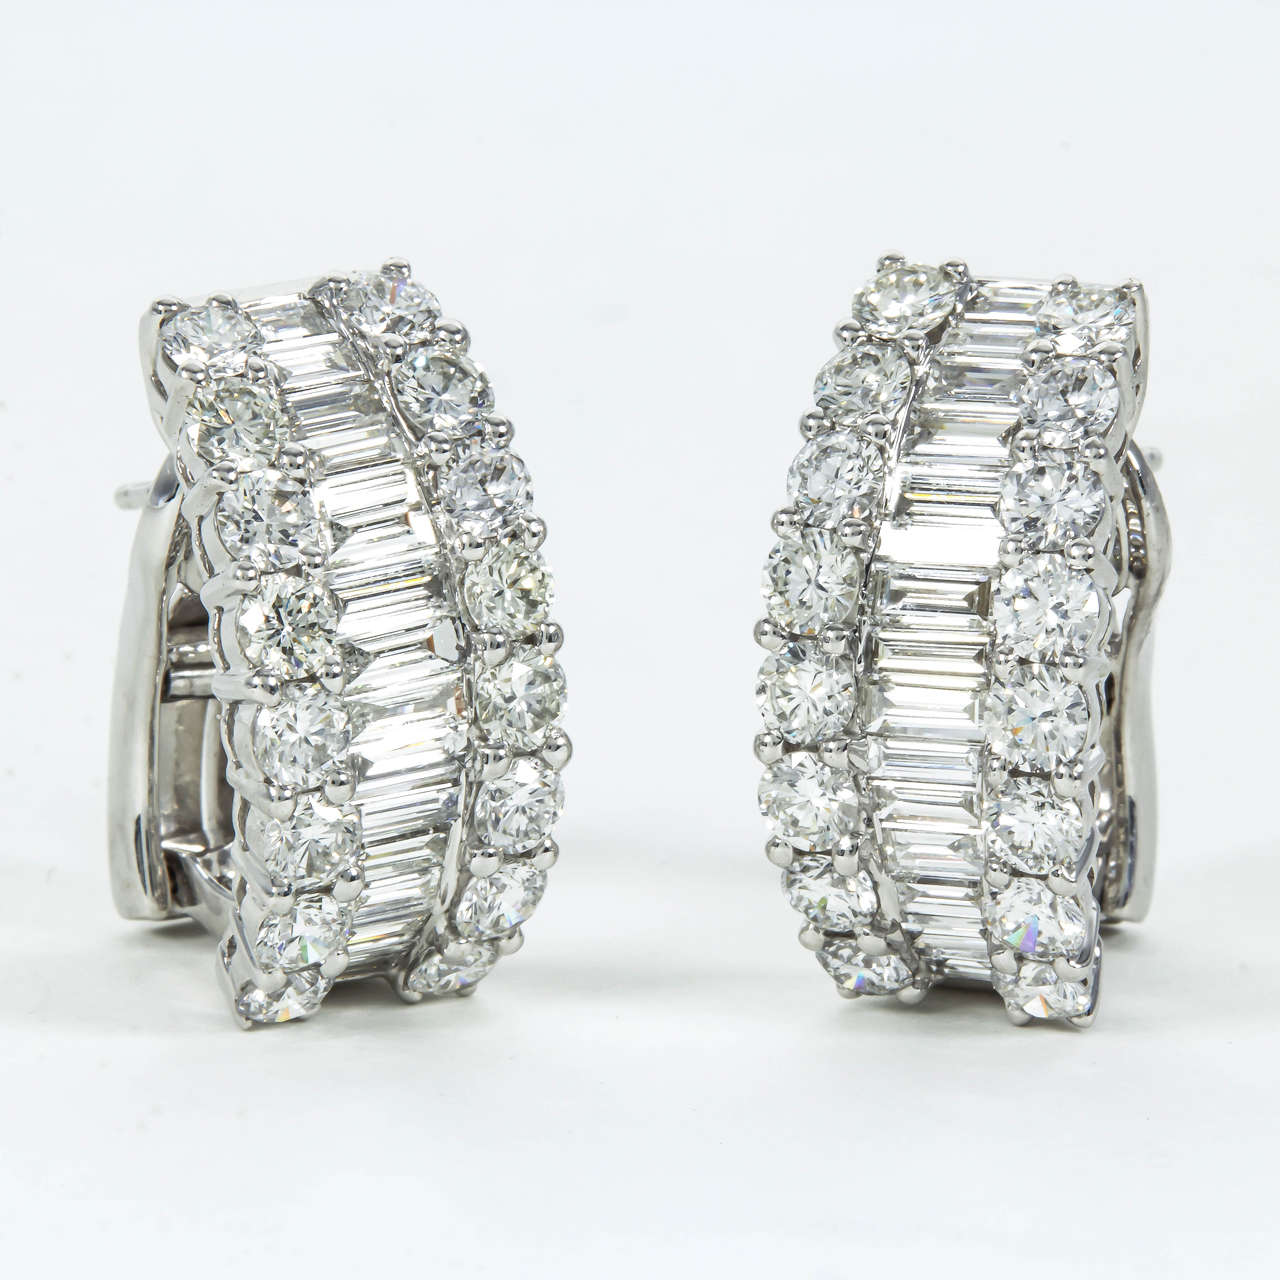 5.49 carats of F/G color VS clarity diamonds set in 18k white gold

*We have a matching ring available on 1stdibs*